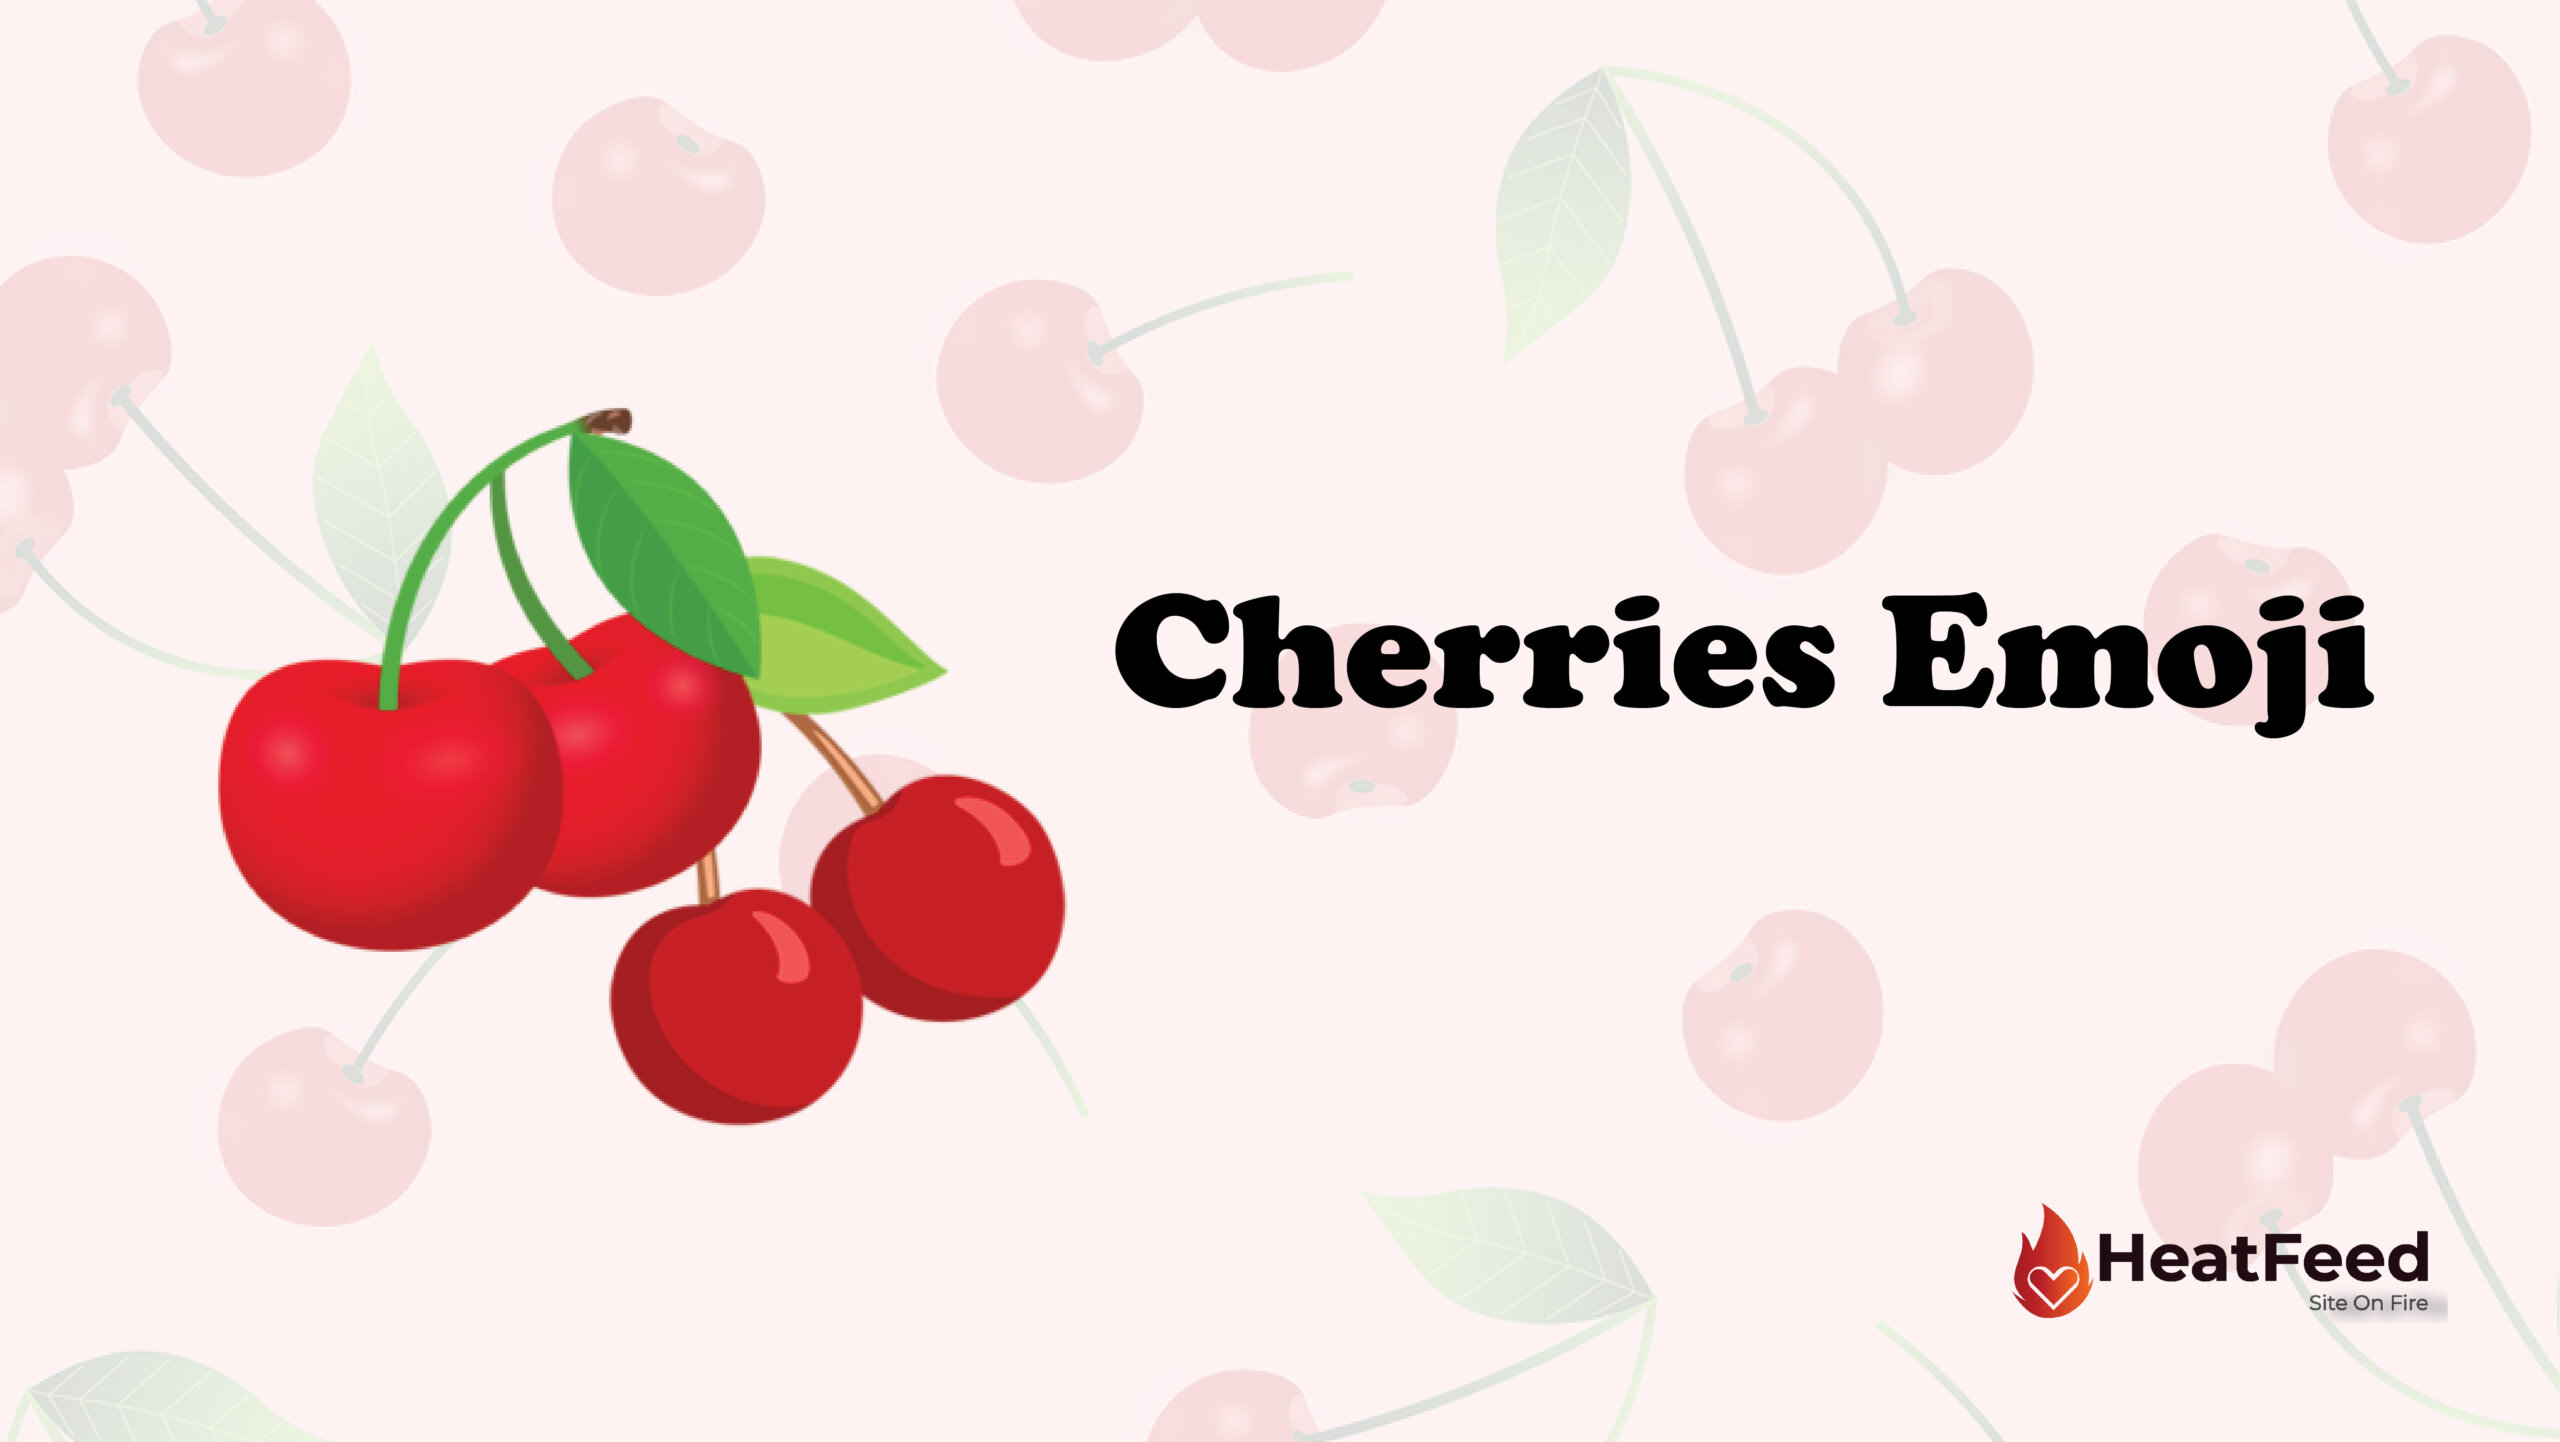 What does cherry emoji mean